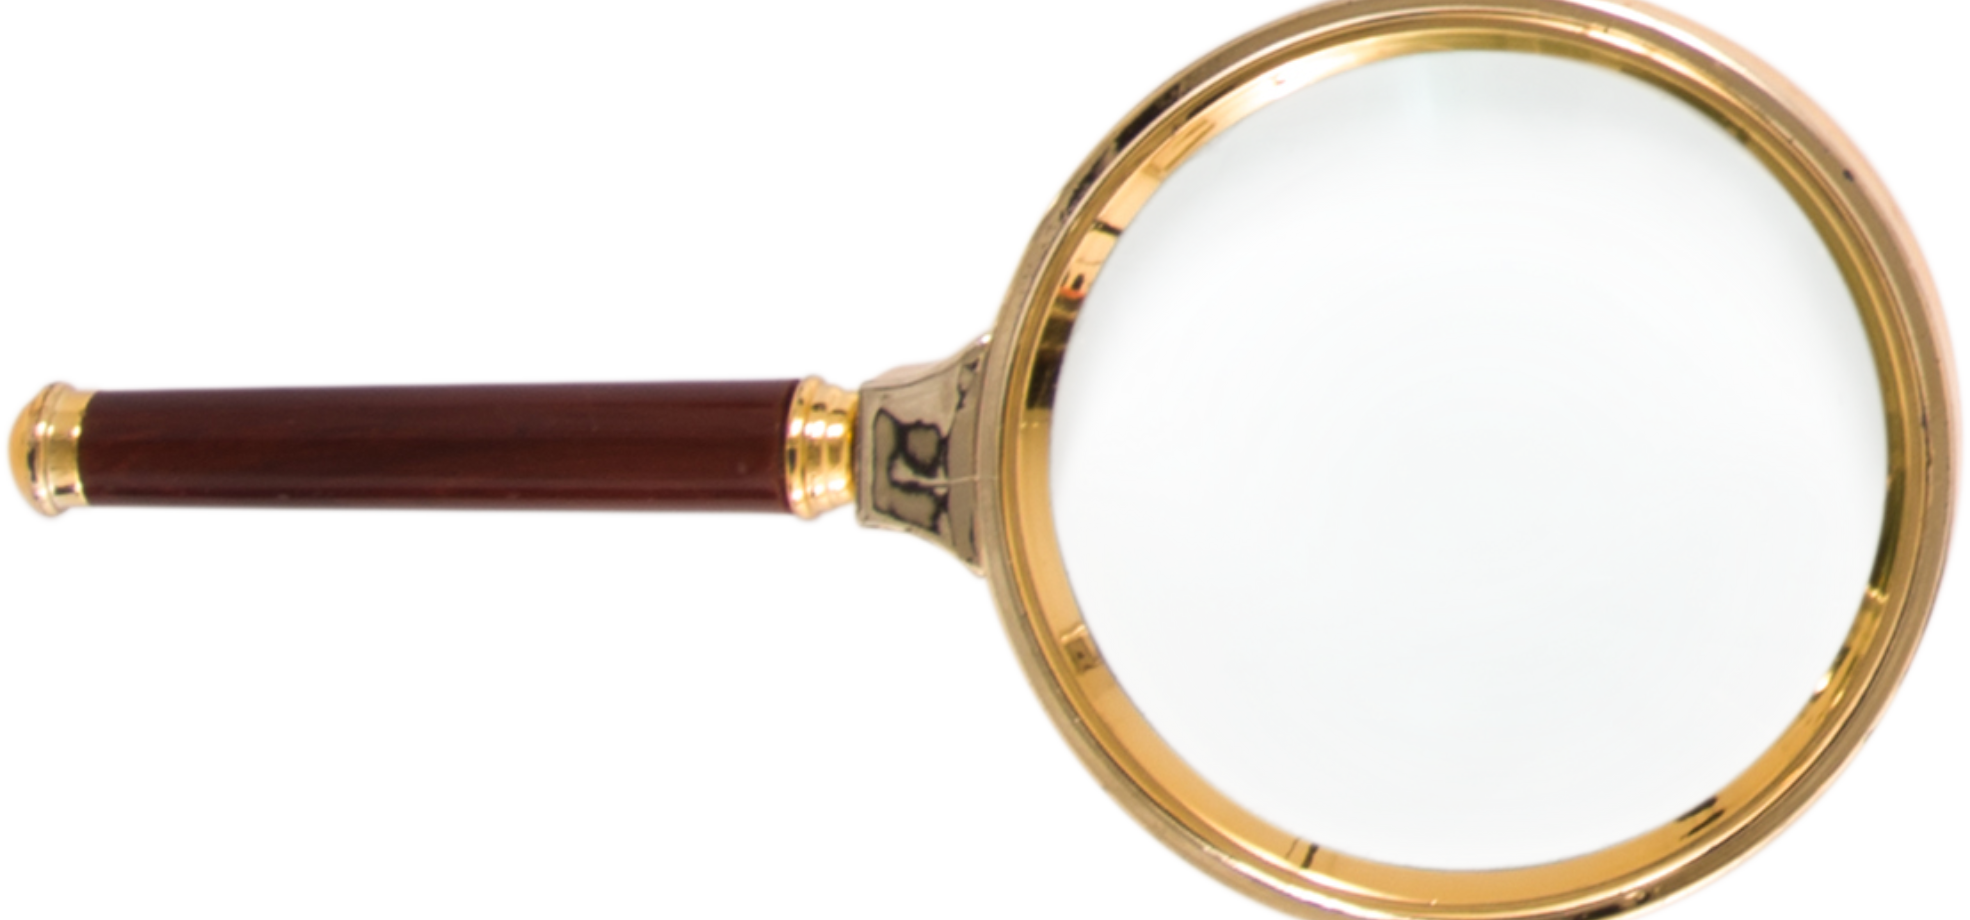 Image of a traditional hand-held round magnifying glass